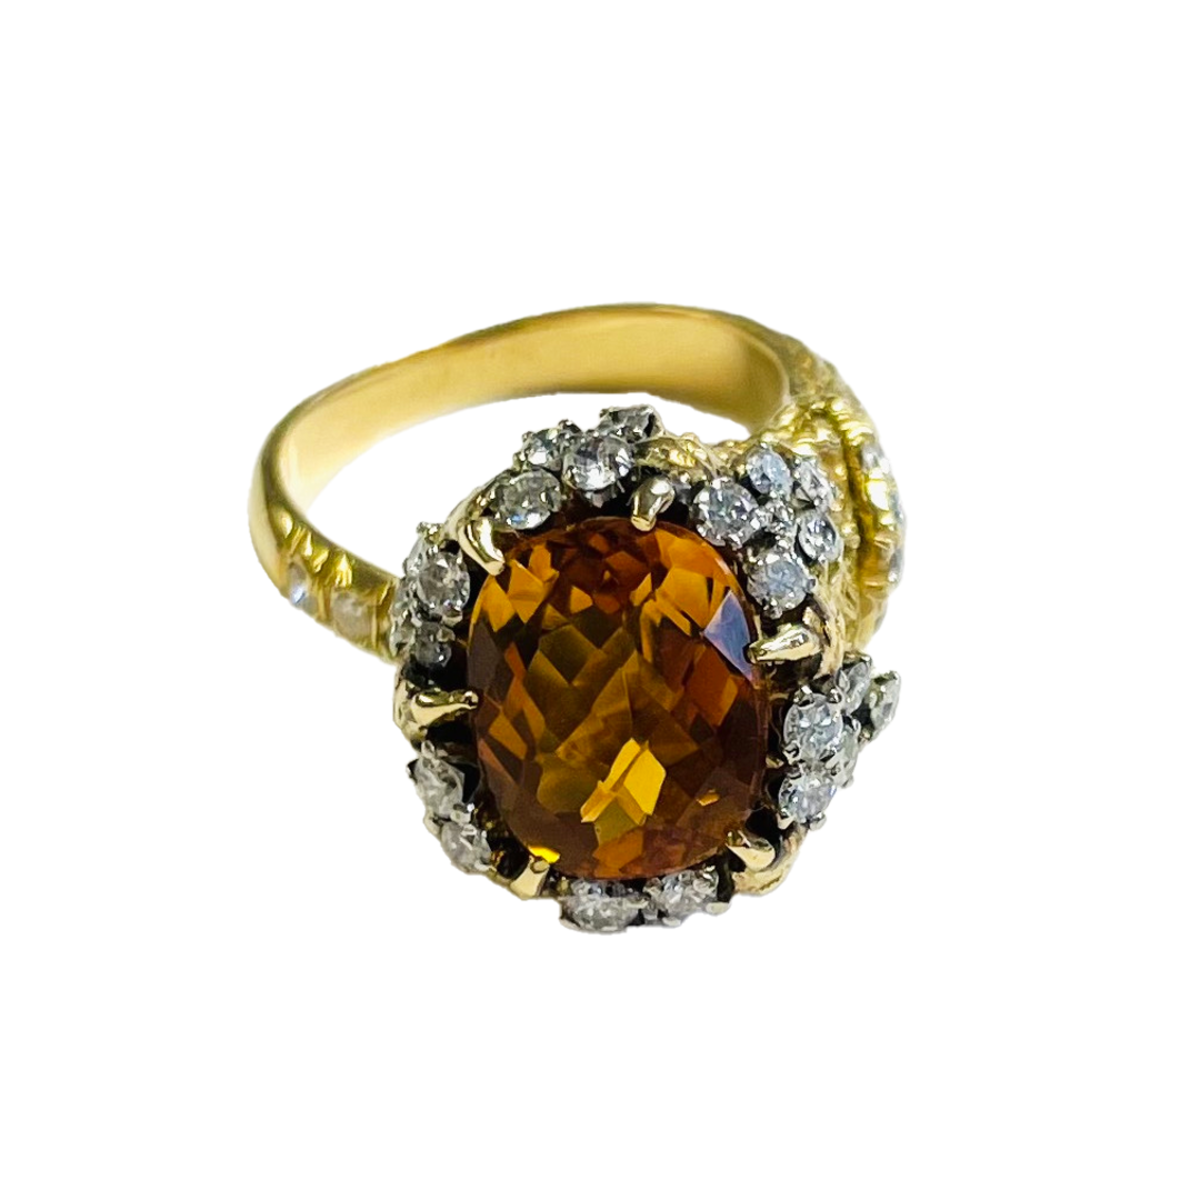 1960s 14KT Yellow Gold Citrine & Diamond Ring front view